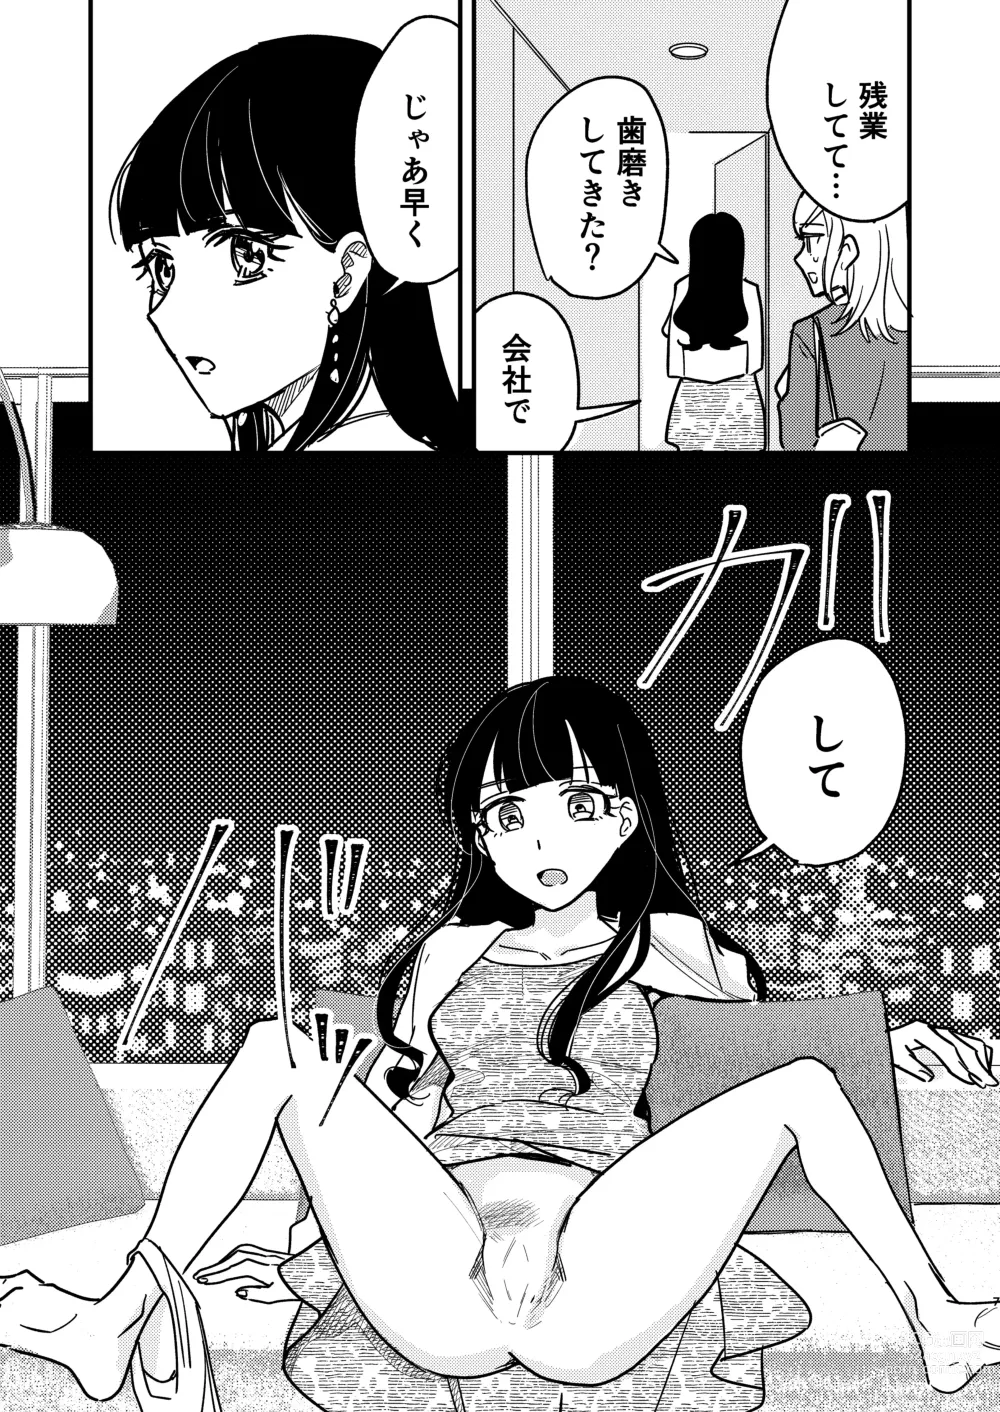 Page 7 of doujinshi Tower Mansion Cunni Caste